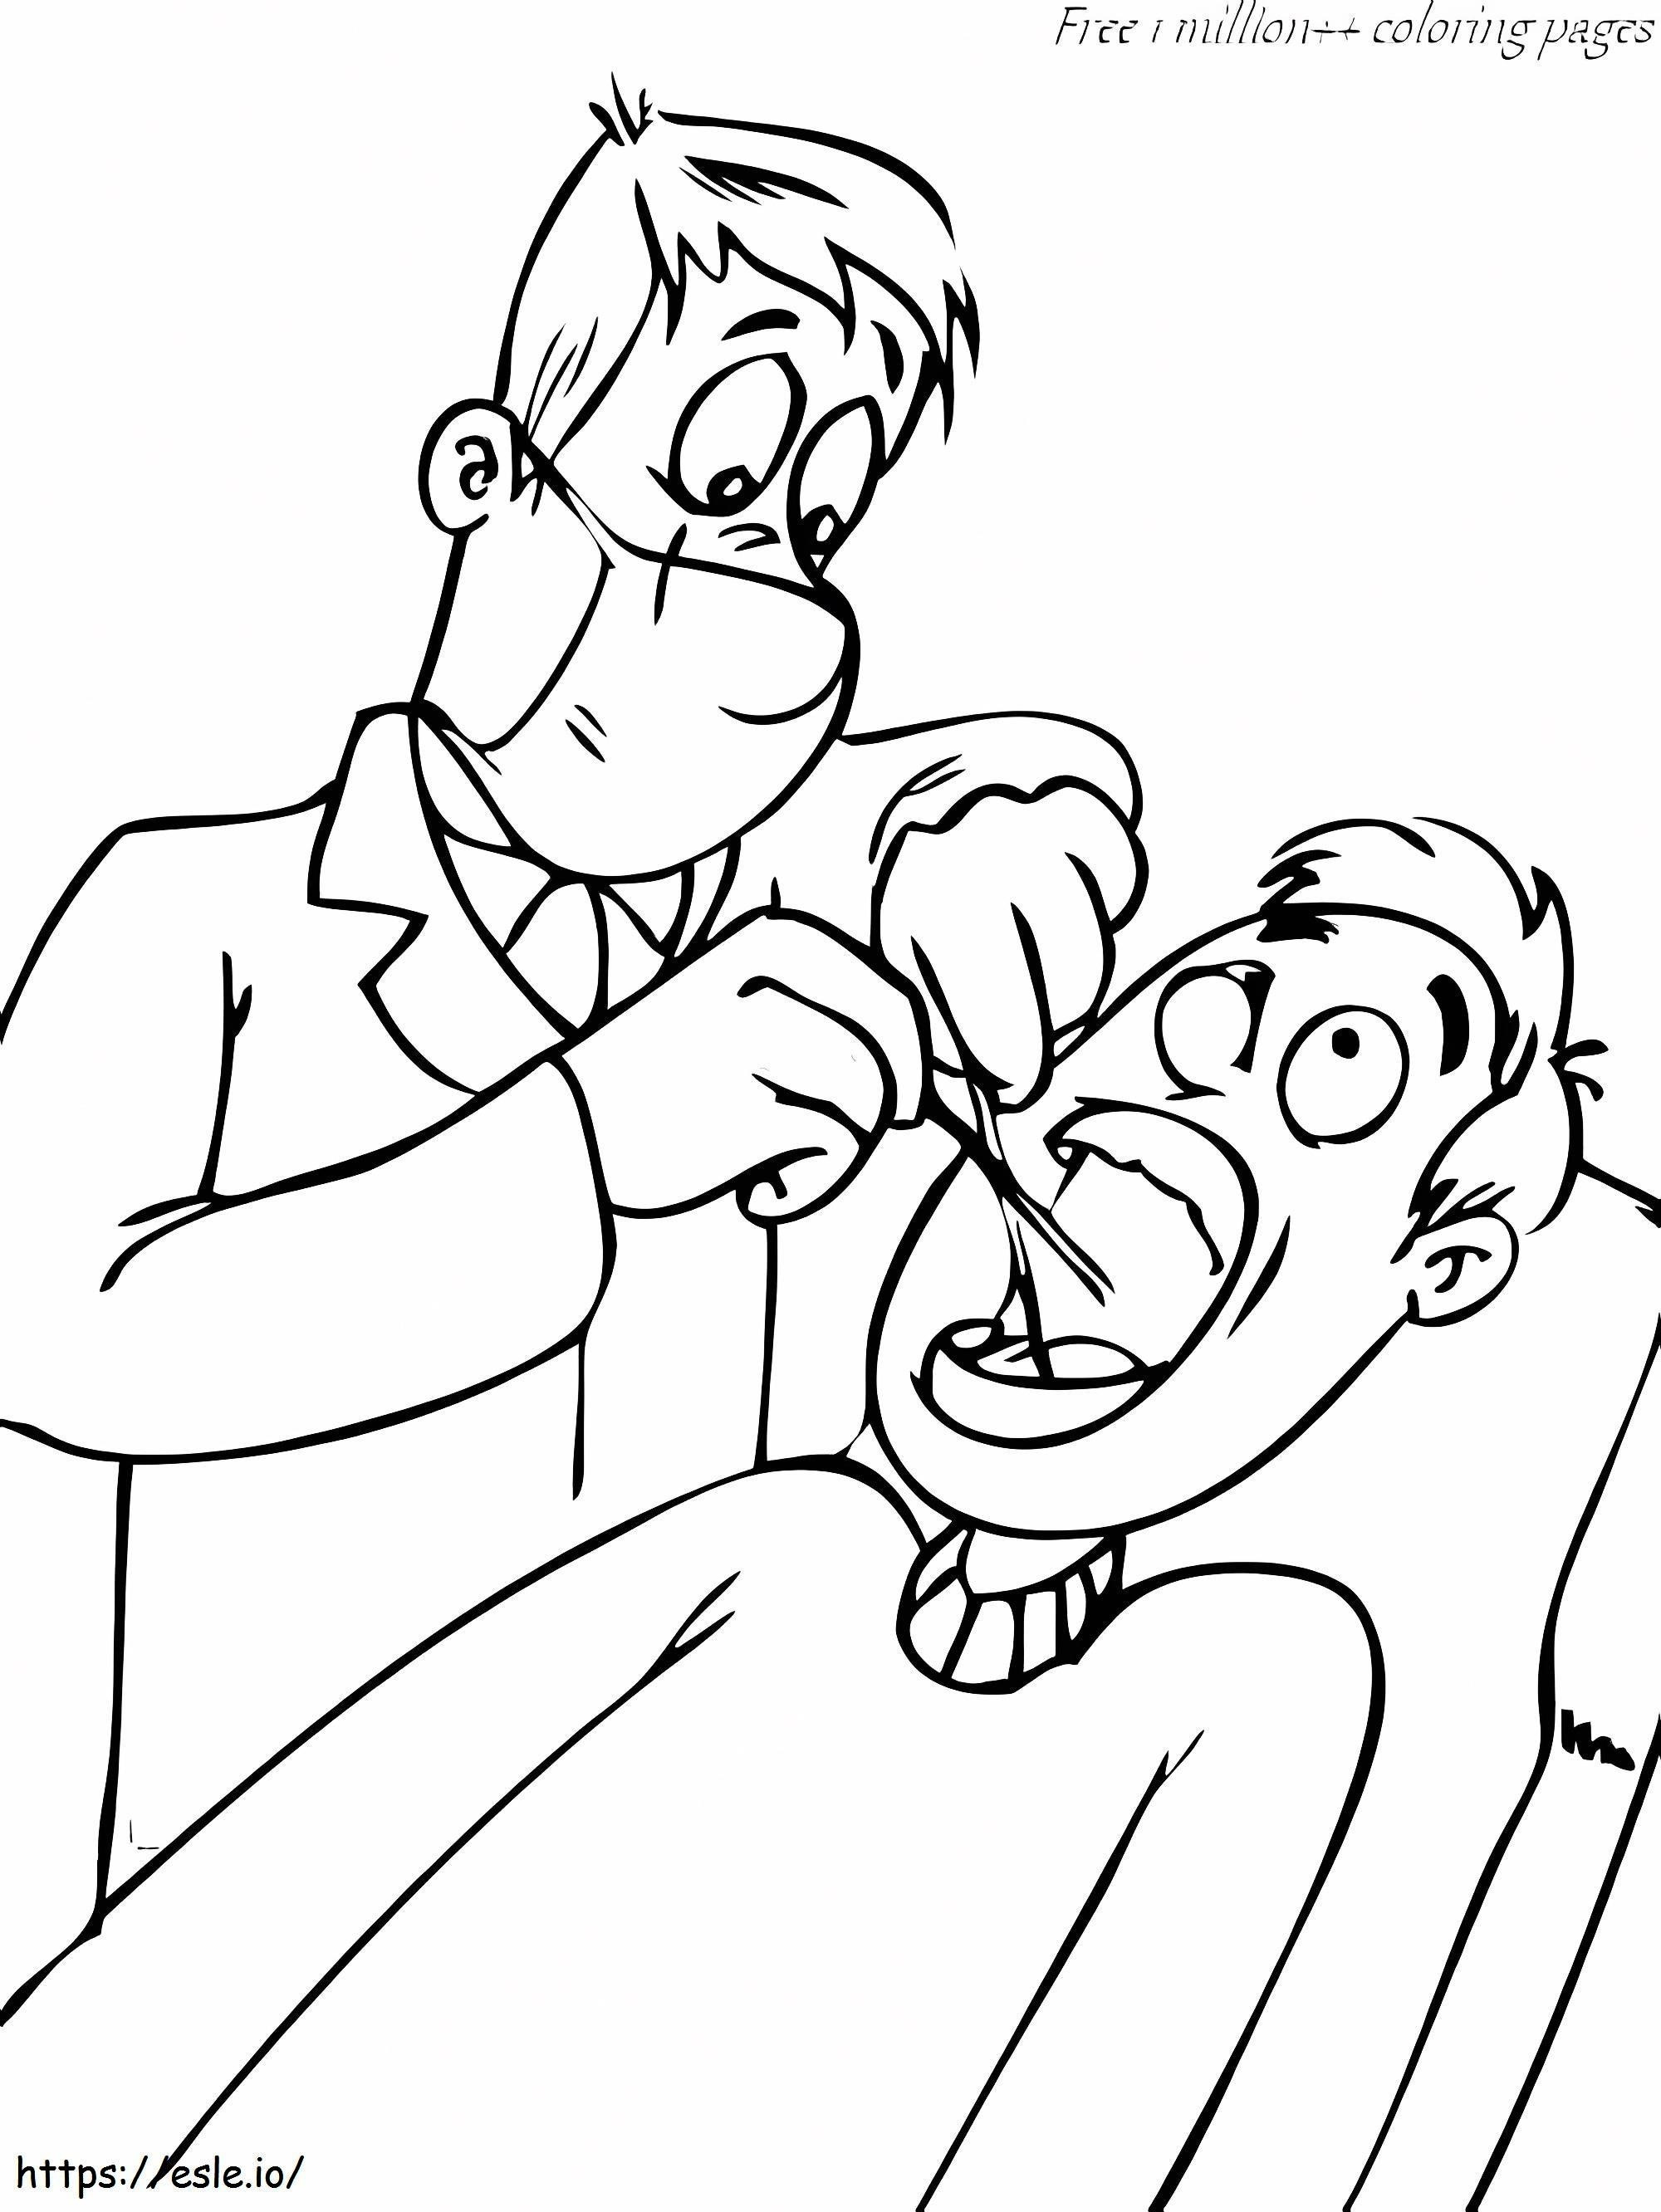 Dentist 8 coloring page